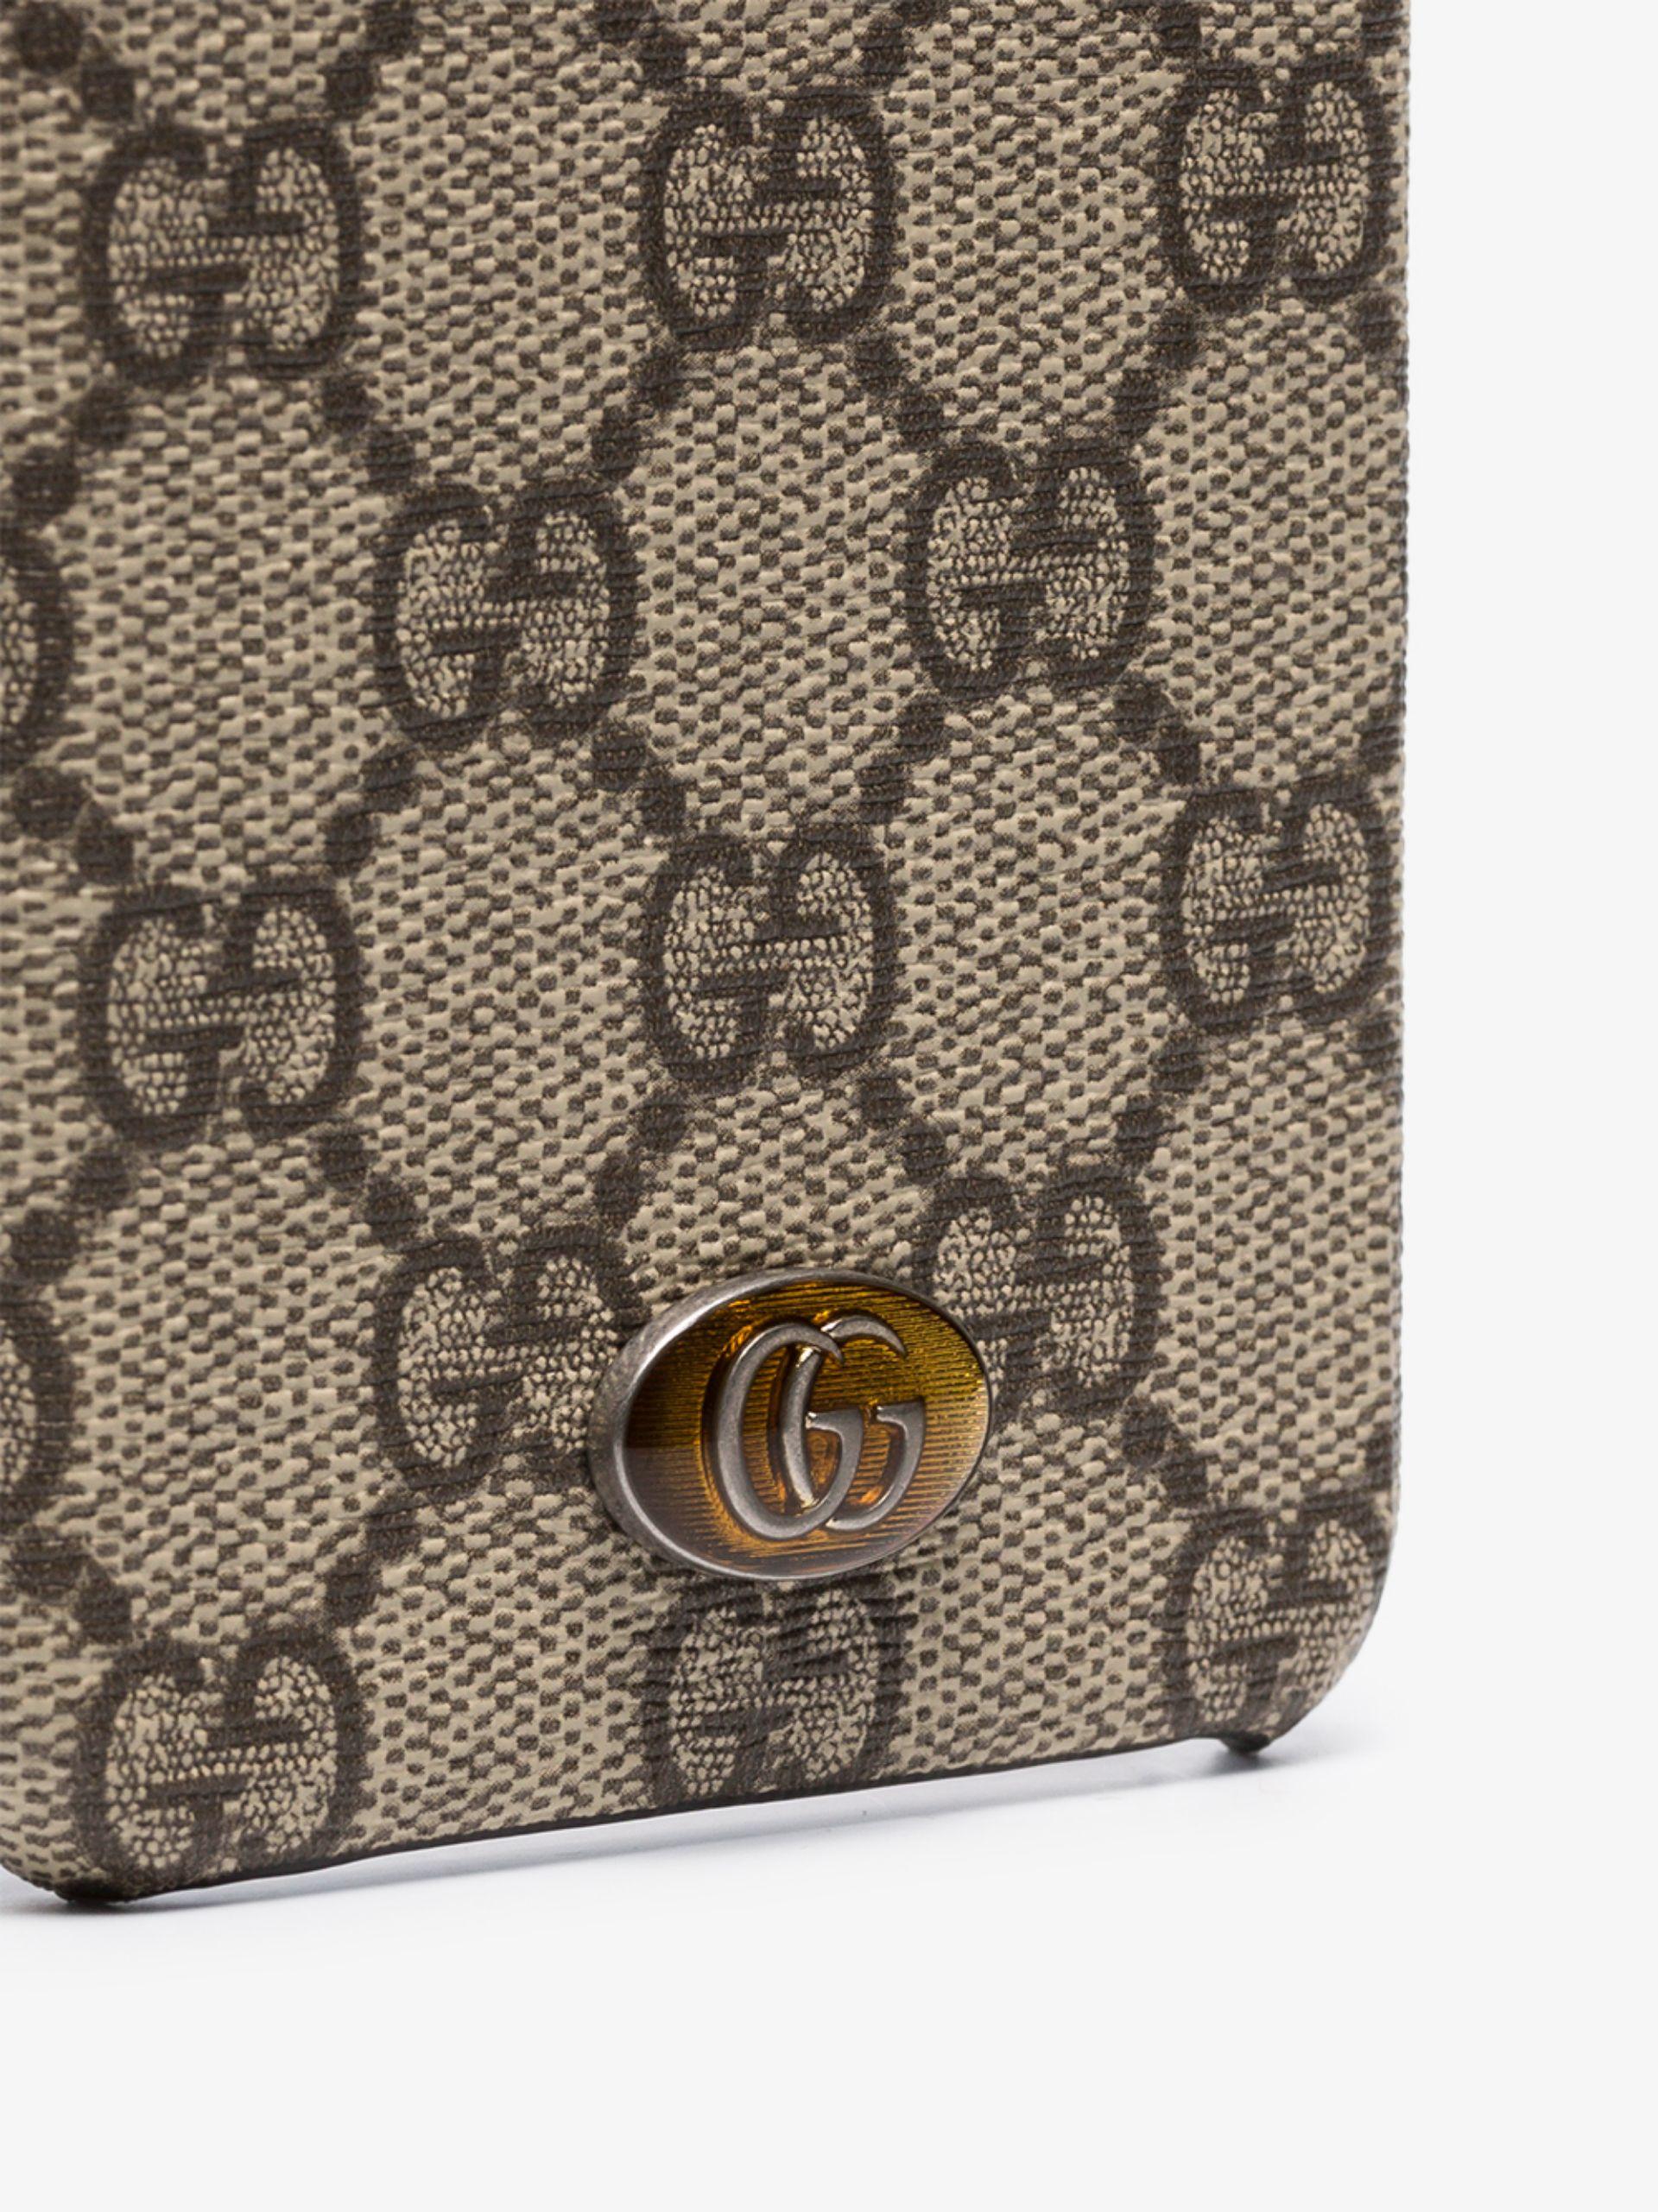 Gucci Ophidia Iphone 8 Plus Case in Brown | Lyst